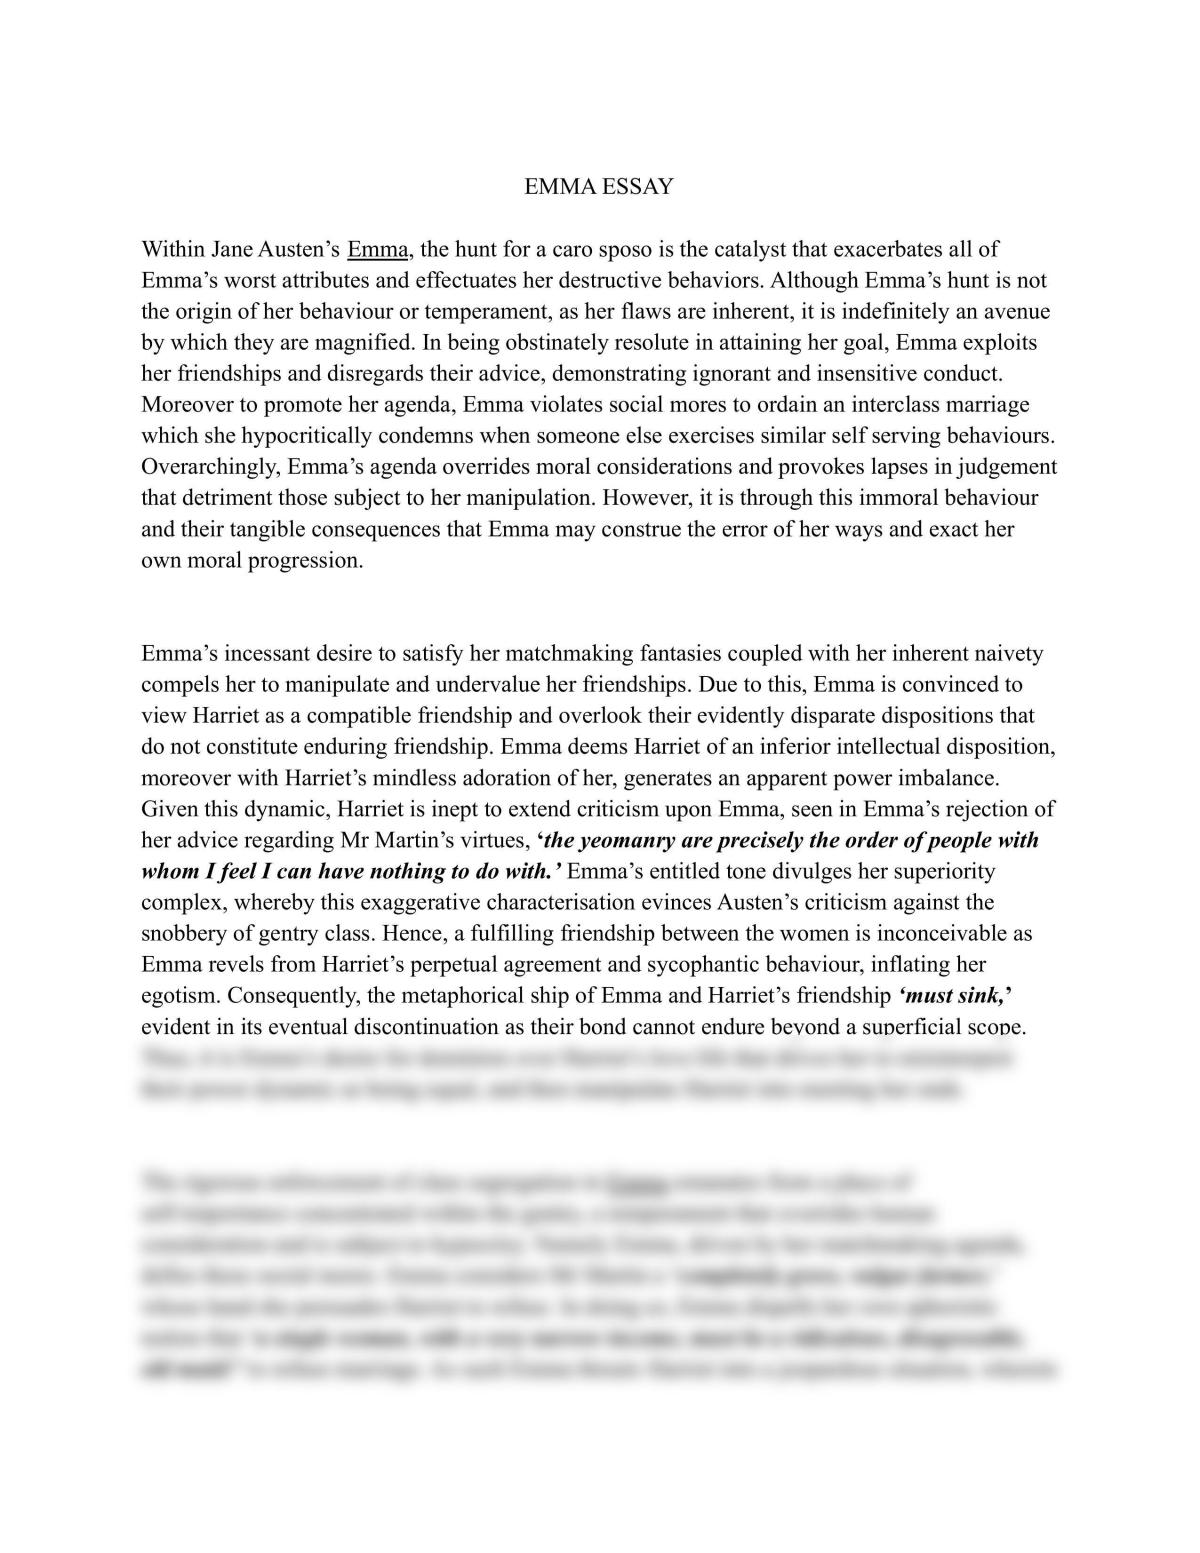 essay on the book emma